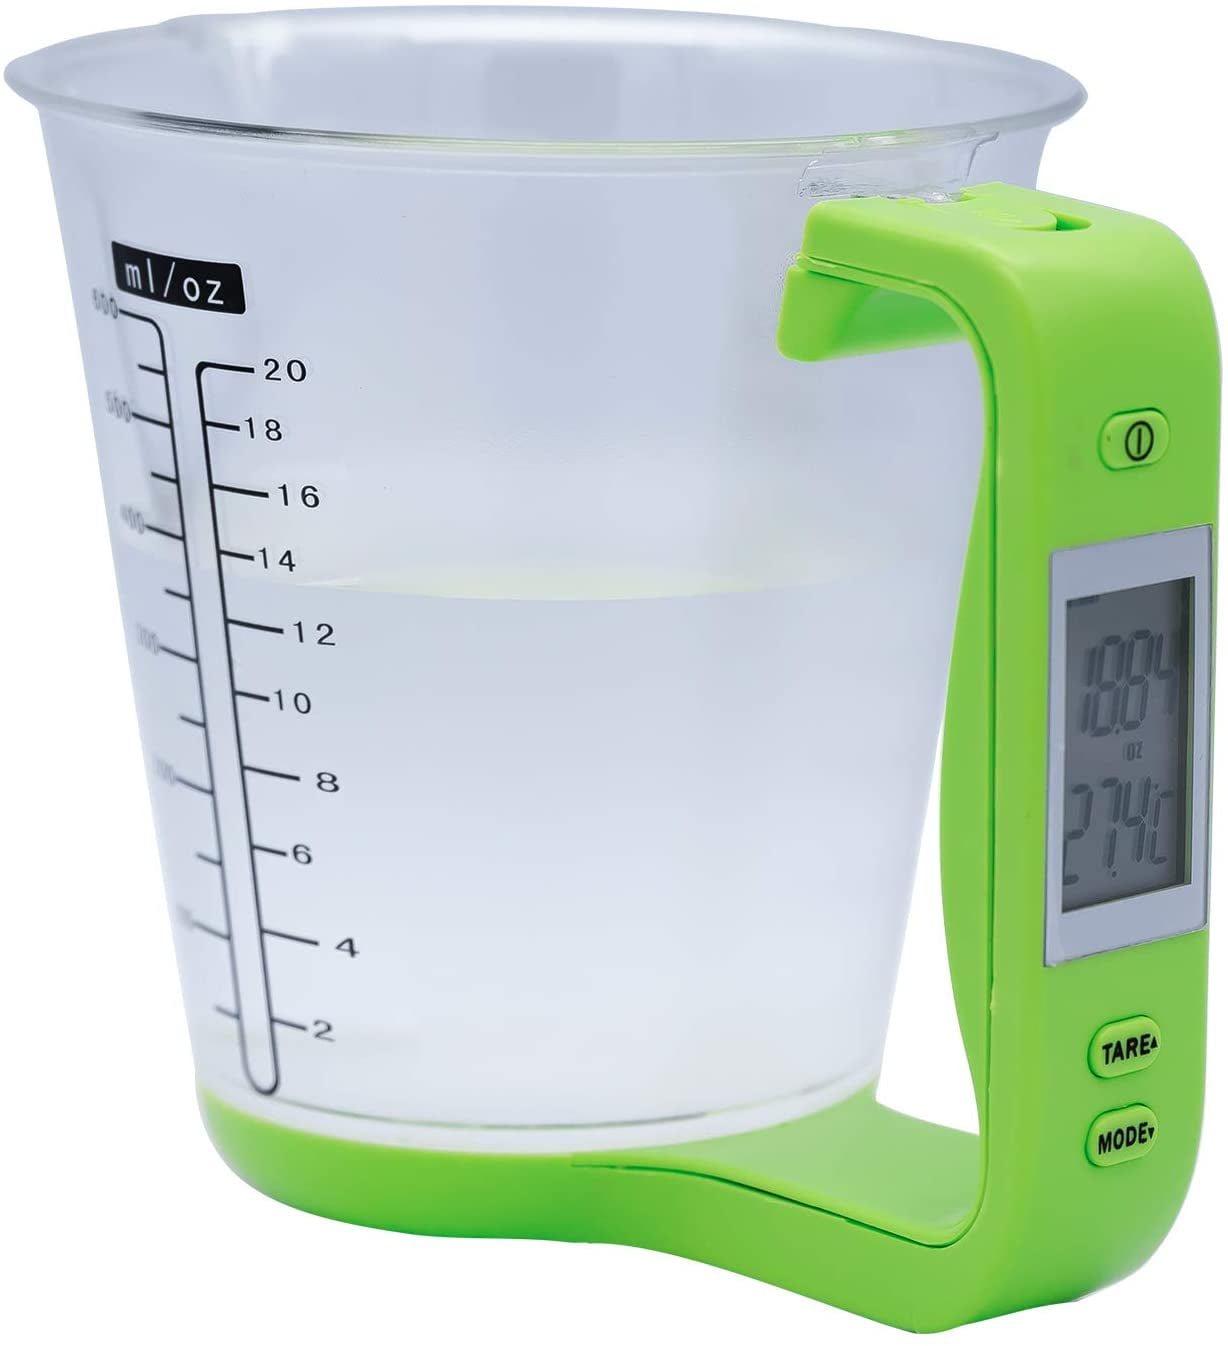 Warkul Practical Food-grade Measuring Cup Clear Scale Precise Plastic Measuring Jar for Baking, Size: 600 ml